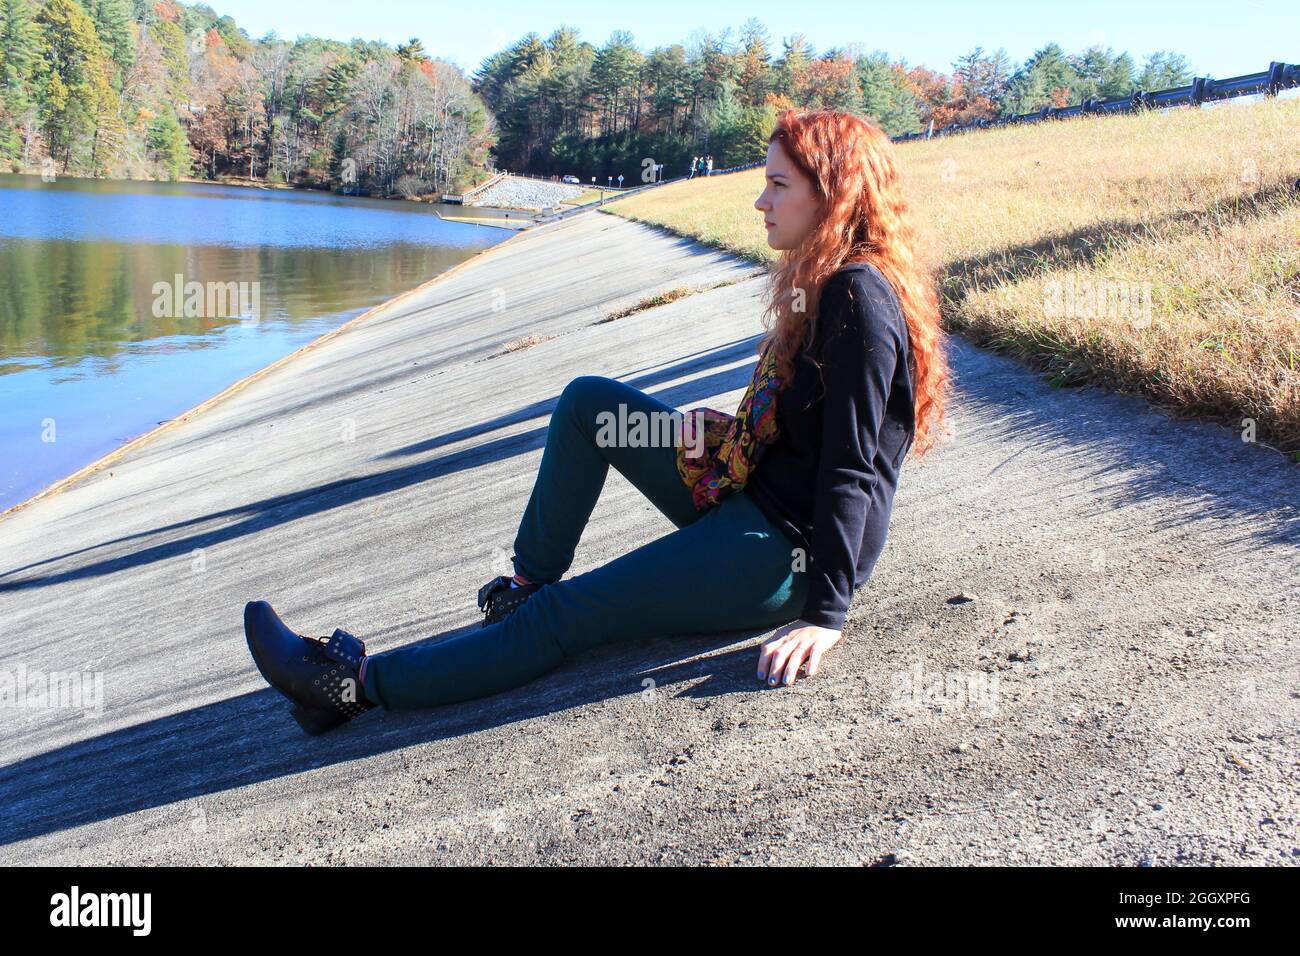 Young woman with red hair is sitting on the ground by a lake on a sunny but cold day Georgia. Stock Photo